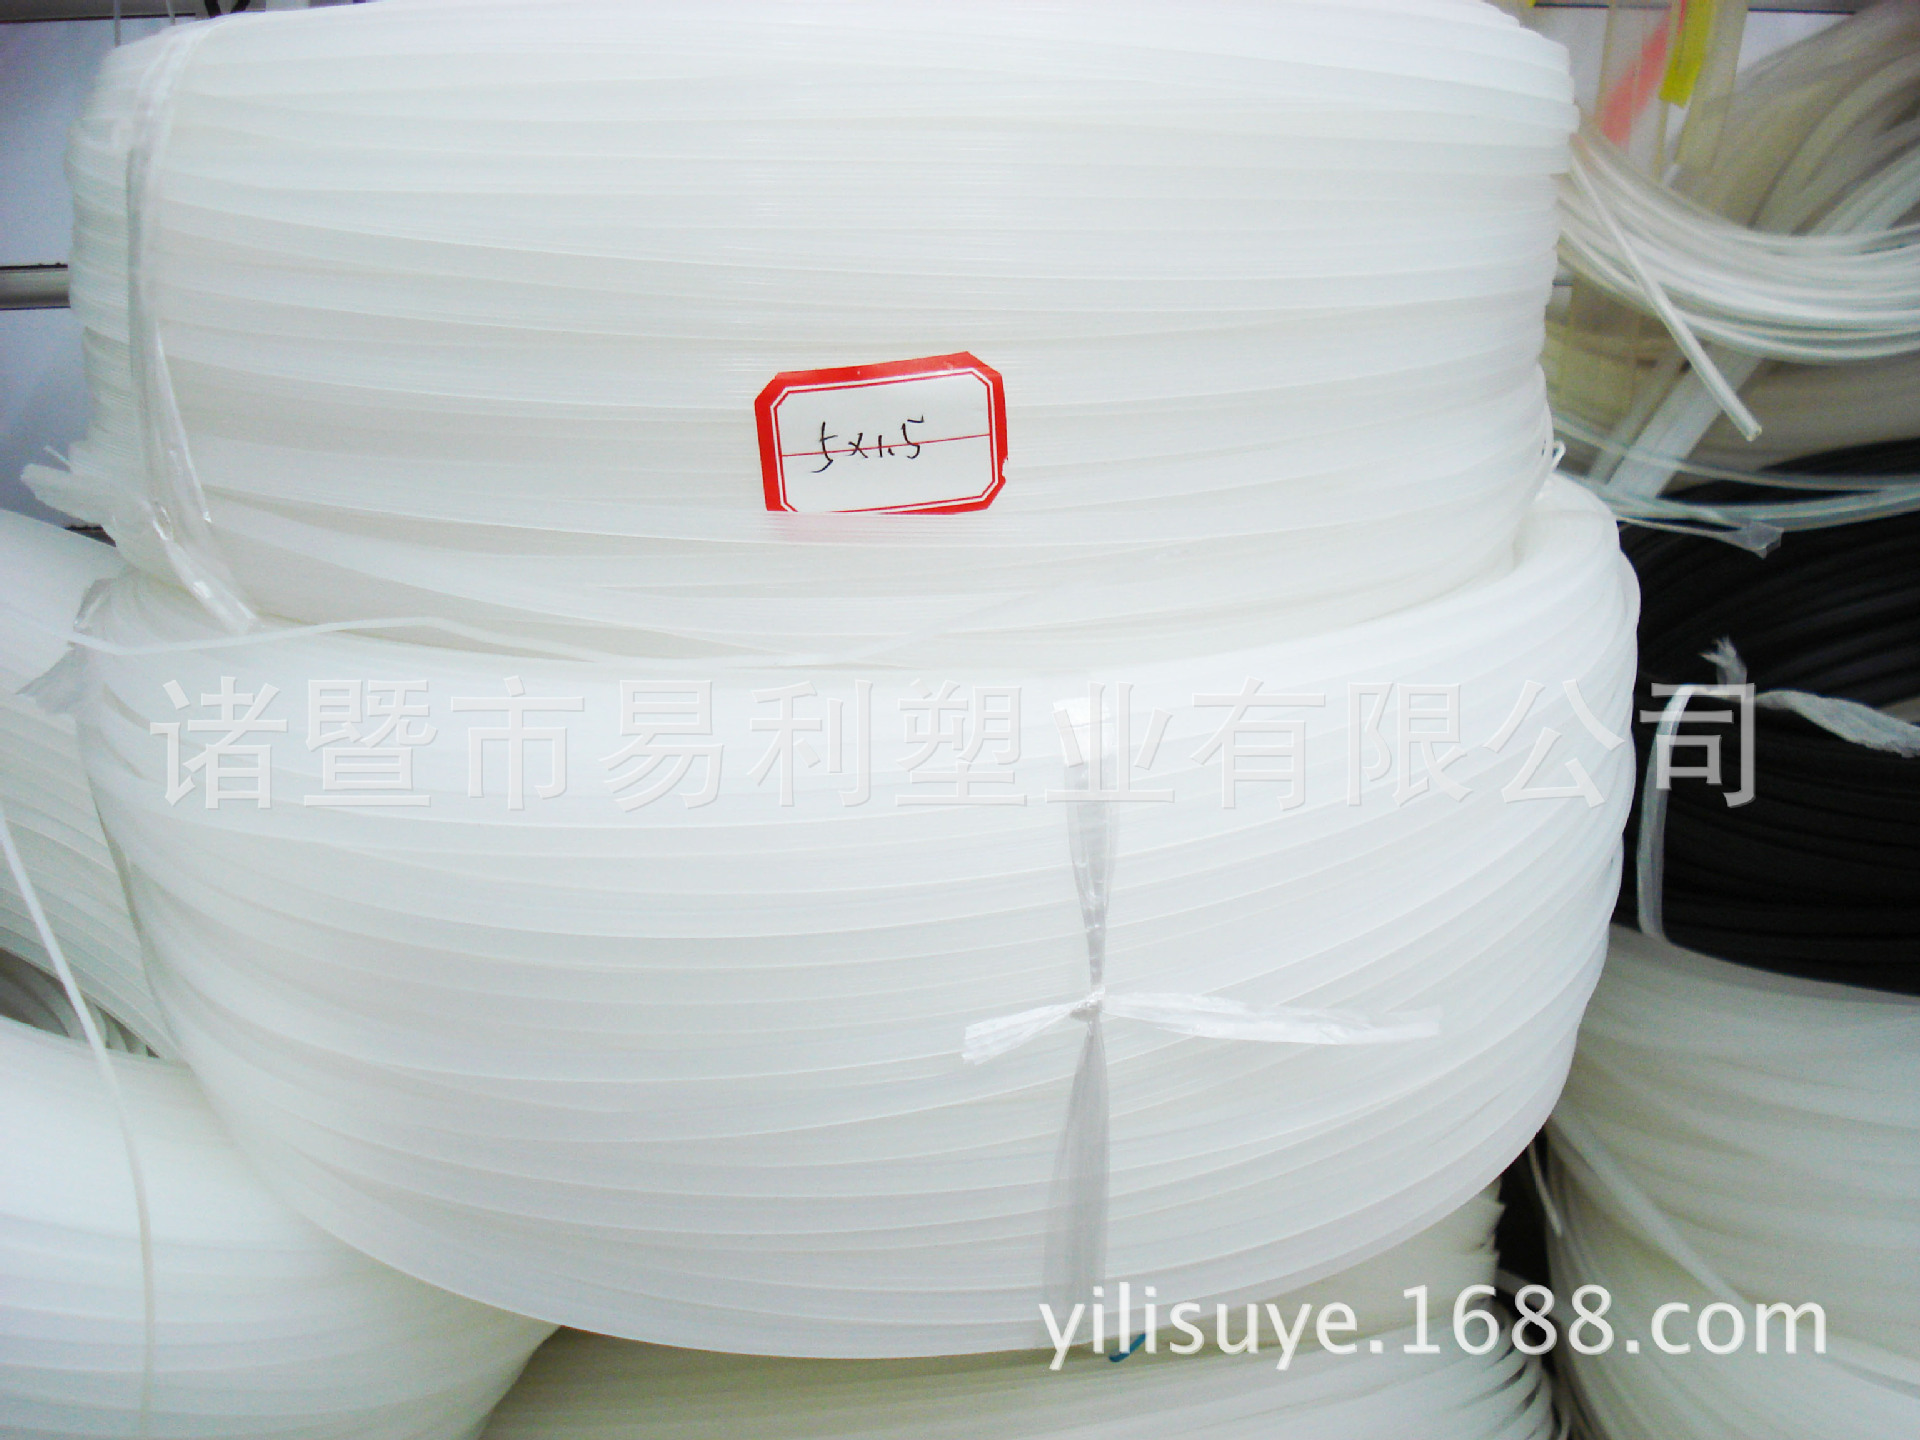 Wedding dresses PP Plastic Stereotype Bone Article Embossed(stripe)Handle 6MM (wide) 2MM (thick)